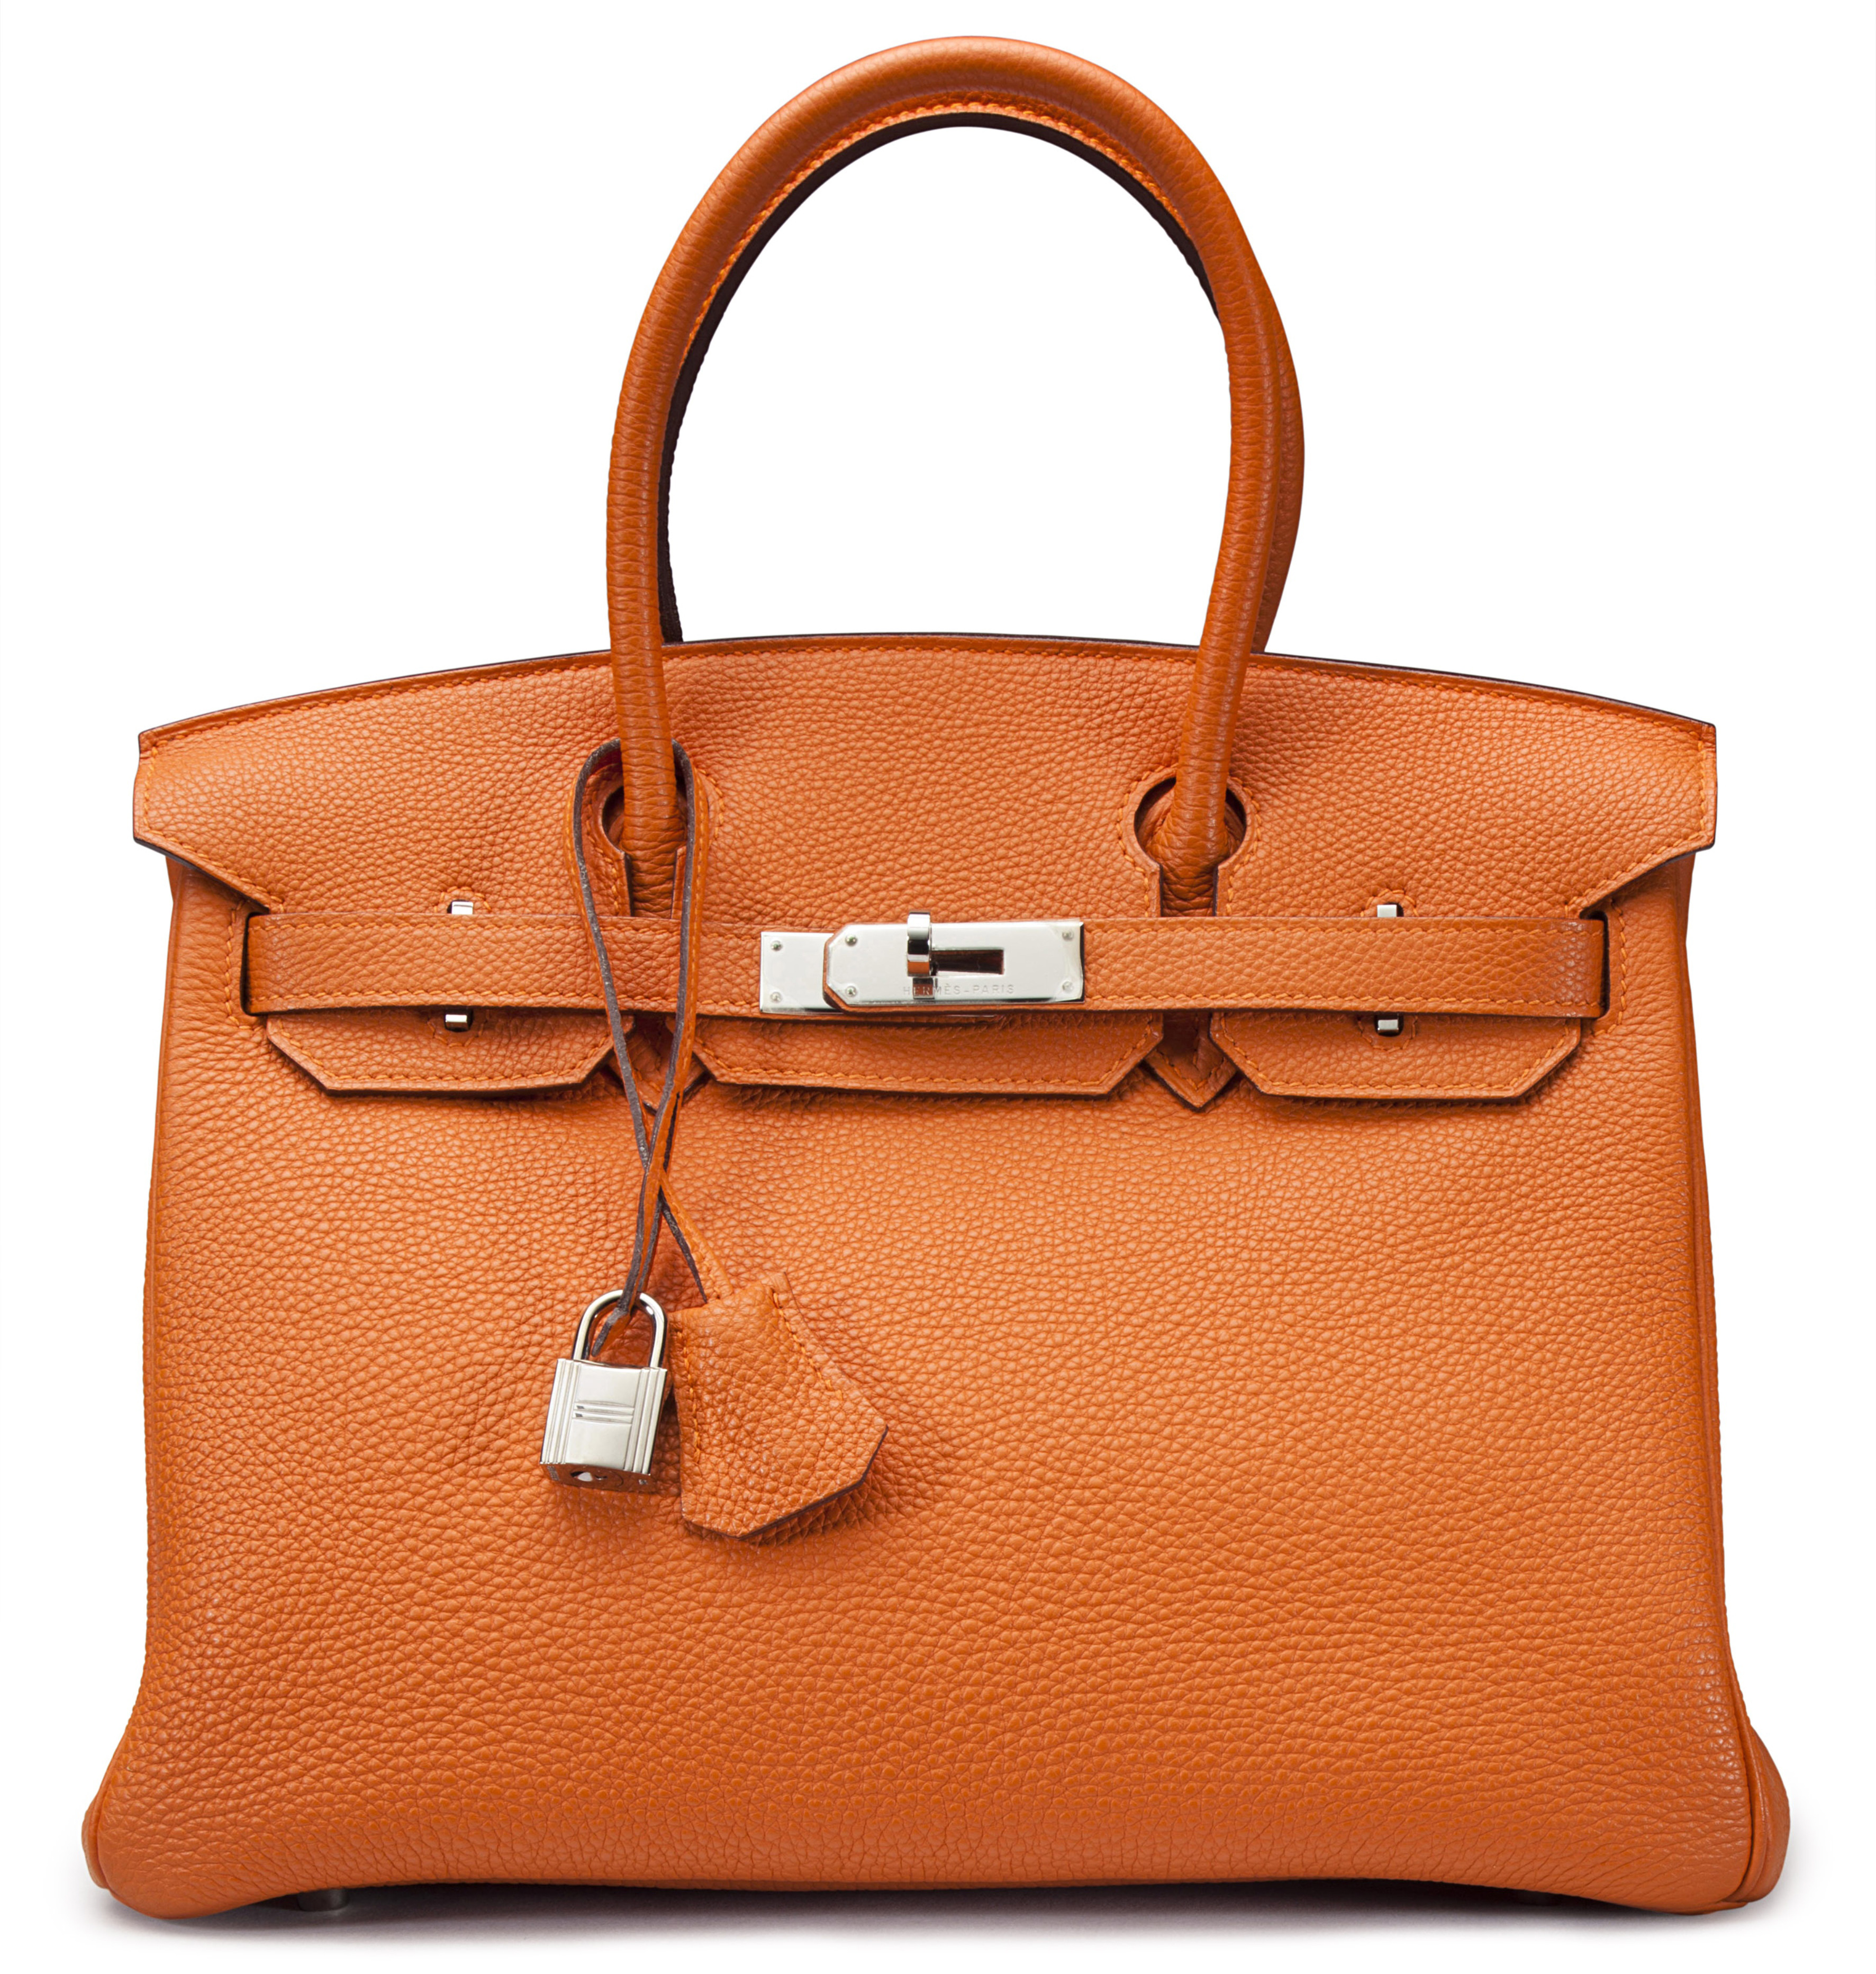 Shop Luxury Bags in Fall Colors at Christie&#39;s First New York Accessories Auction - PurseBlog